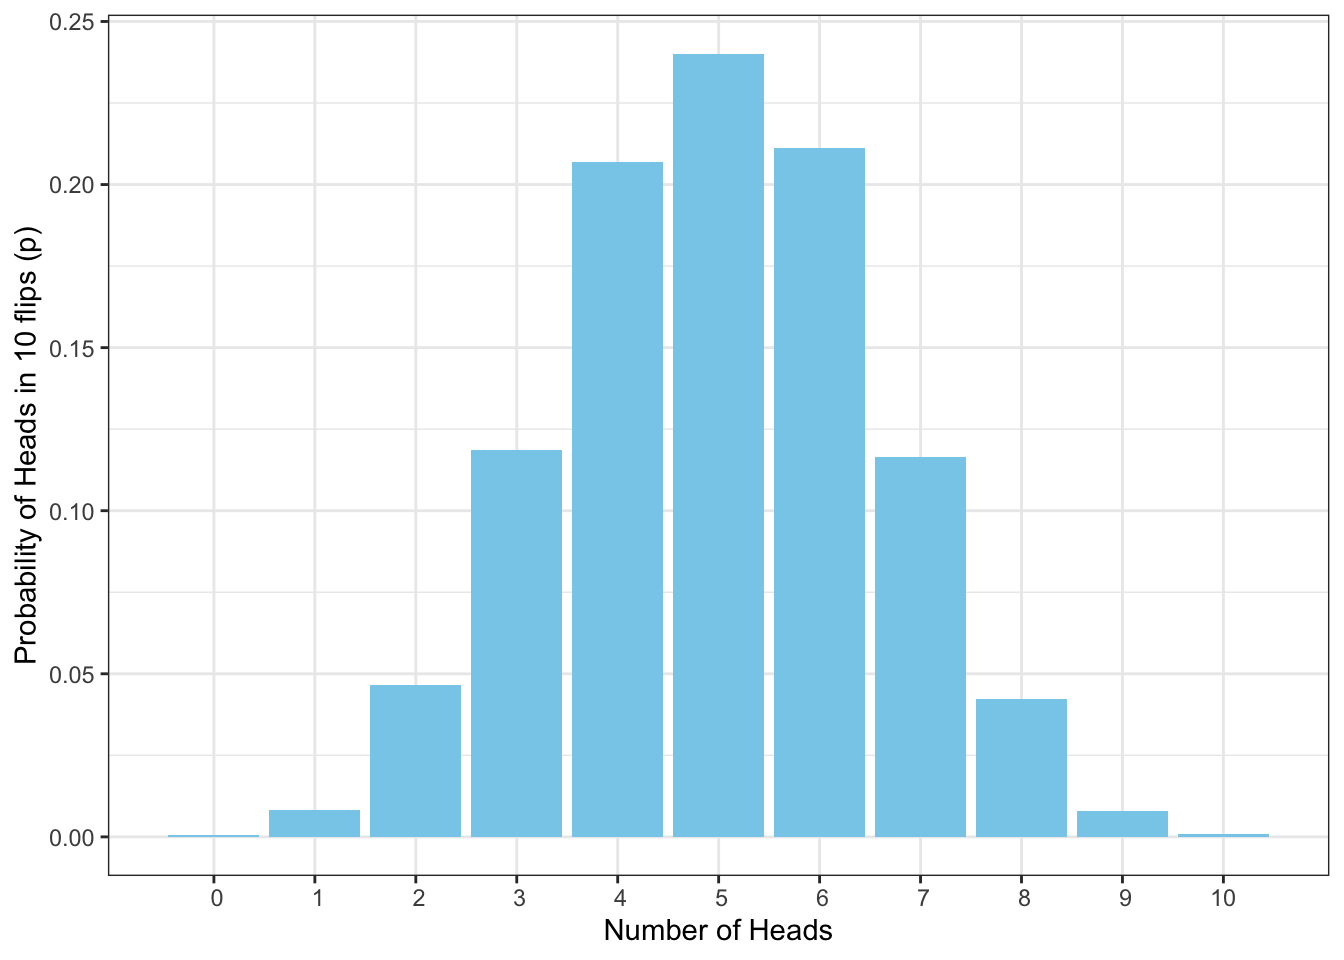 Probability Distribution of Number of Heads in 10 Flips